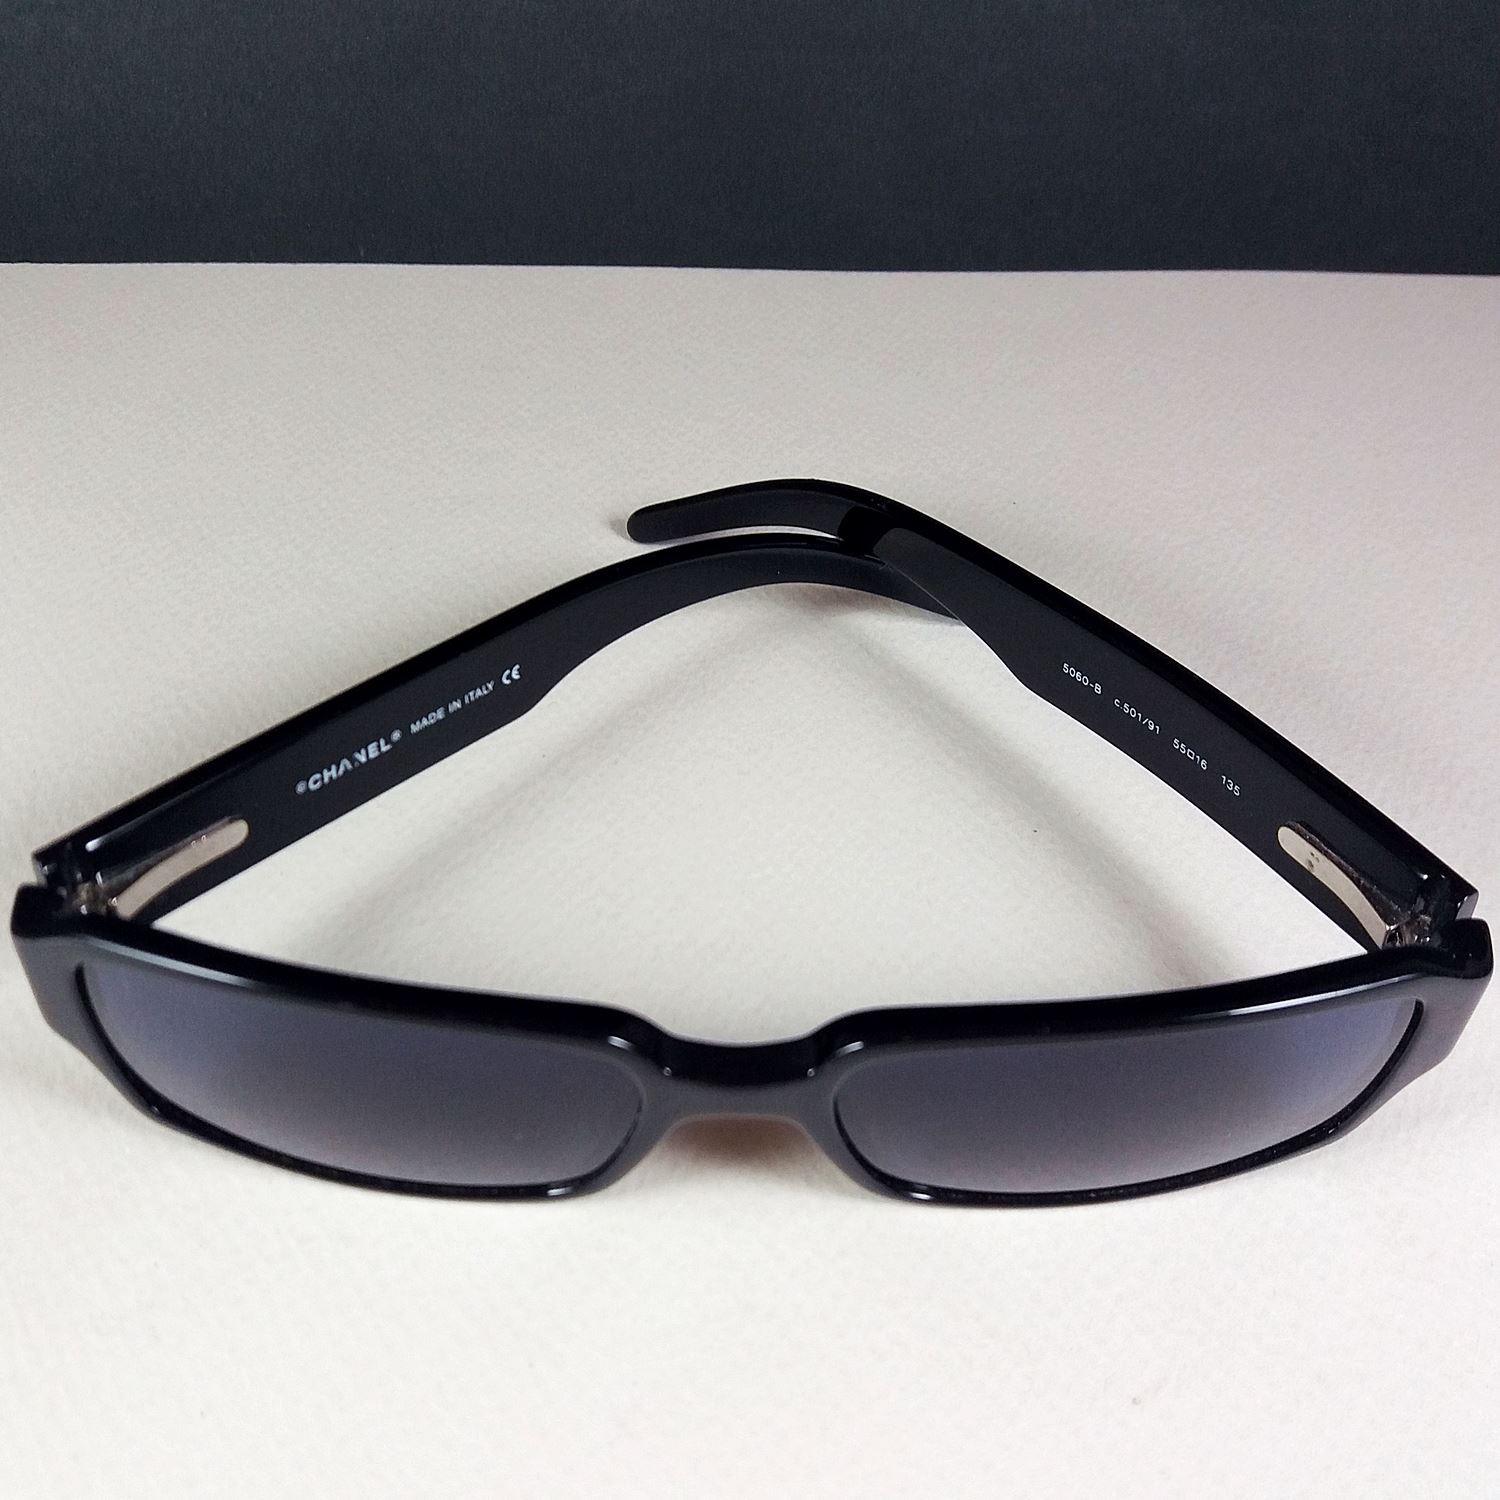 Chanel Black Acetate 5067 Sunglasses ○ Labellov ○ Buy and Sell Authentic  Luxury